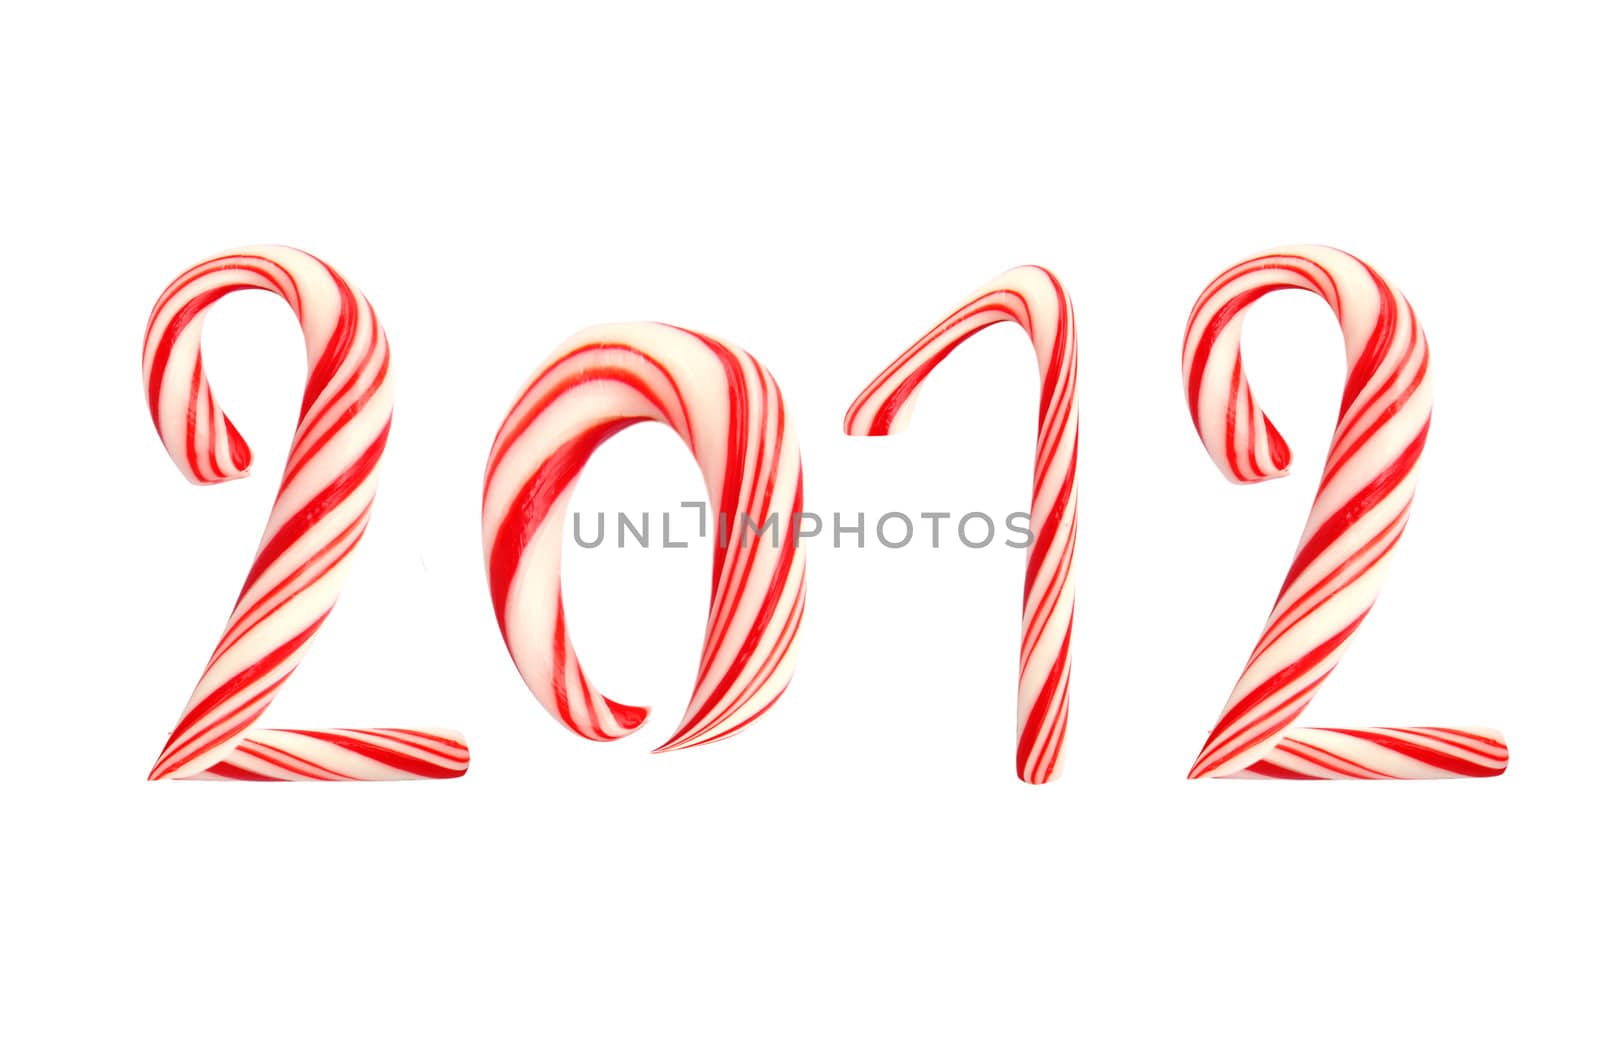 2012 made of christmas lollipop cane isolated on white